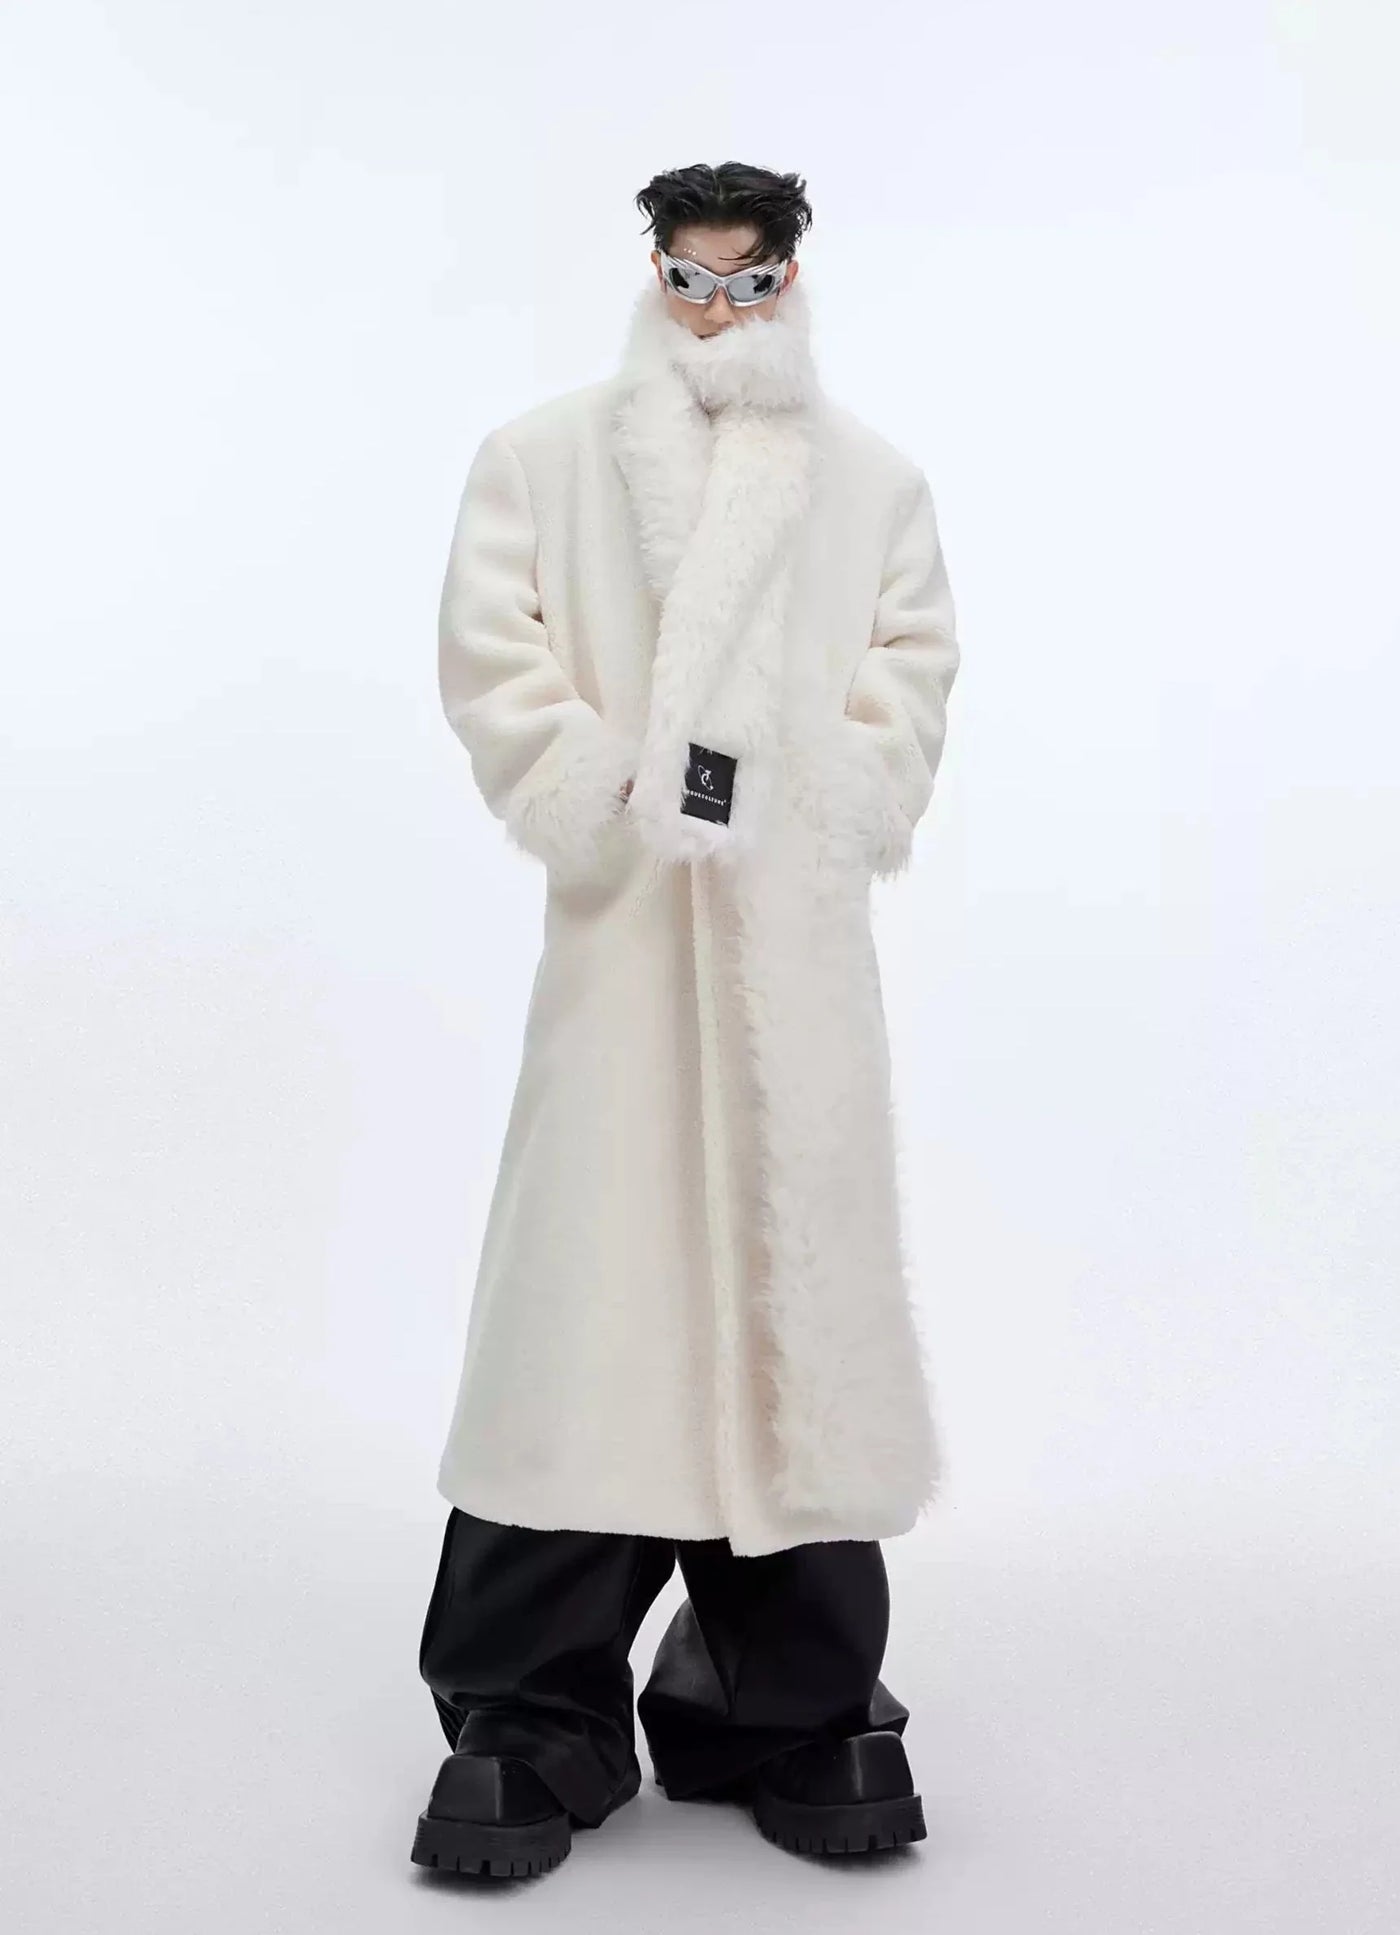 Heavyweight Furry Overcoat Korean Street Fashion Long Coat By Argue Culture Shop Online at OH Vault